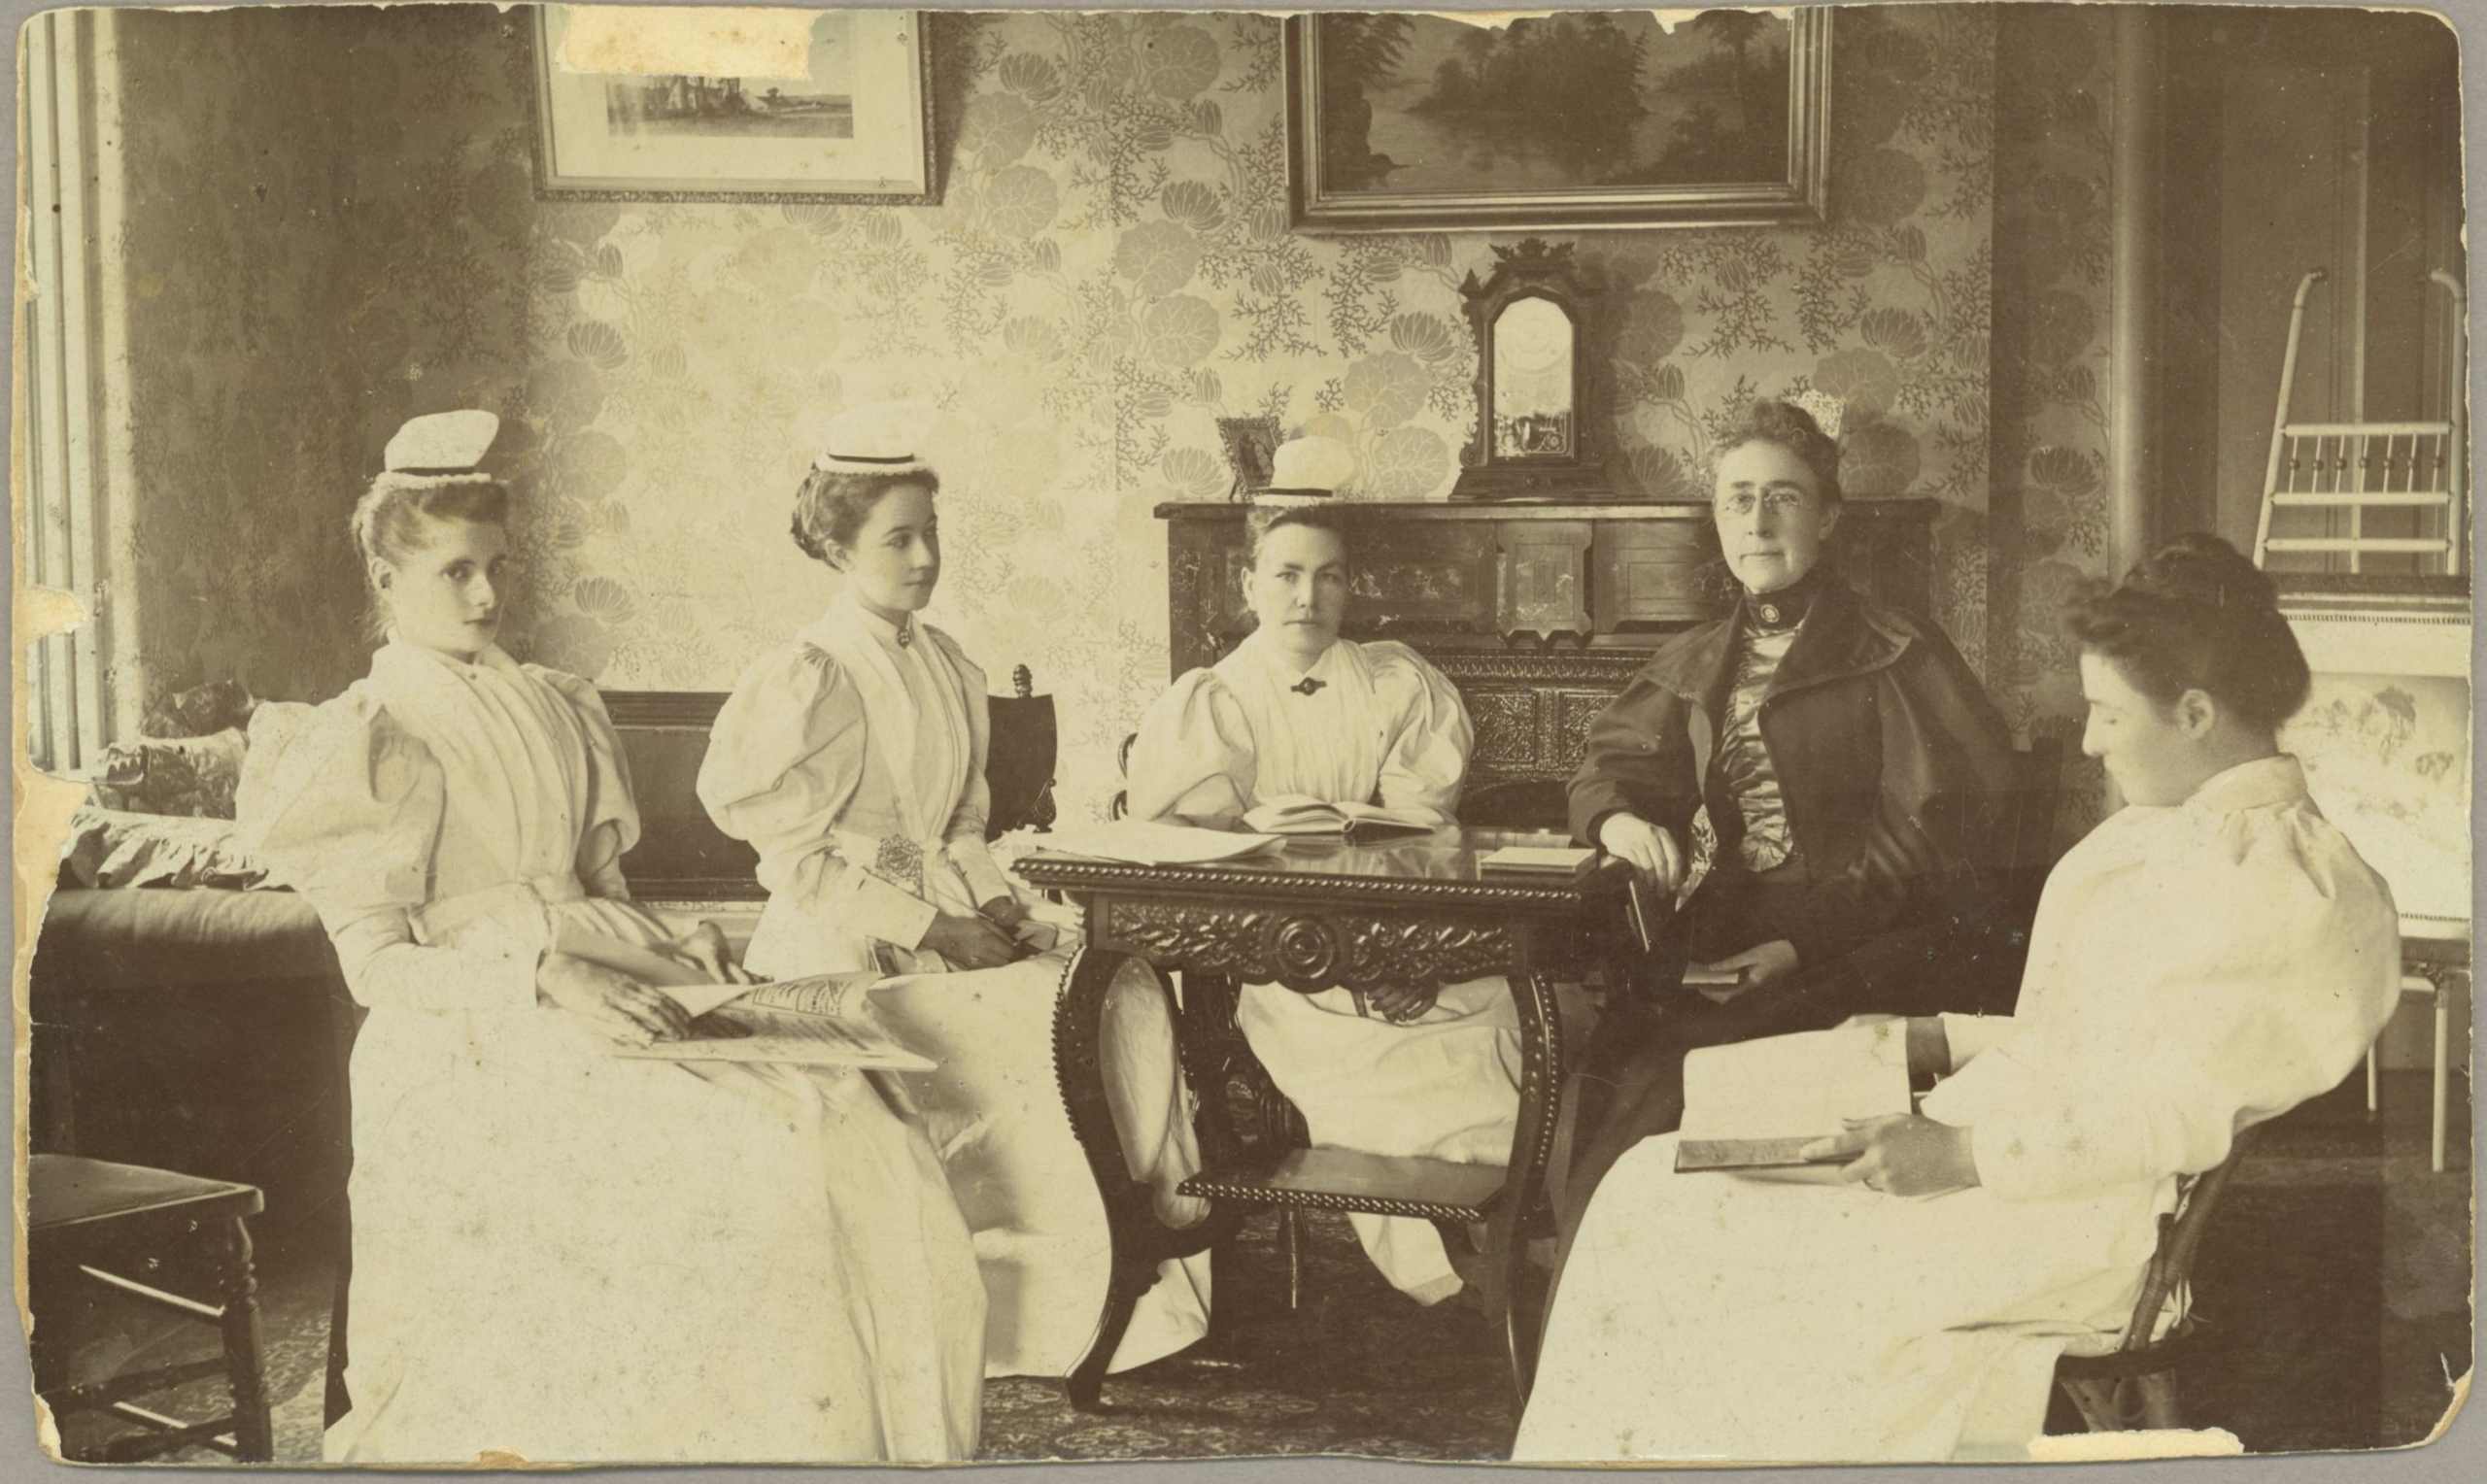 Nurses sitting at a table. Second woman on the left is wearing chatelaine.